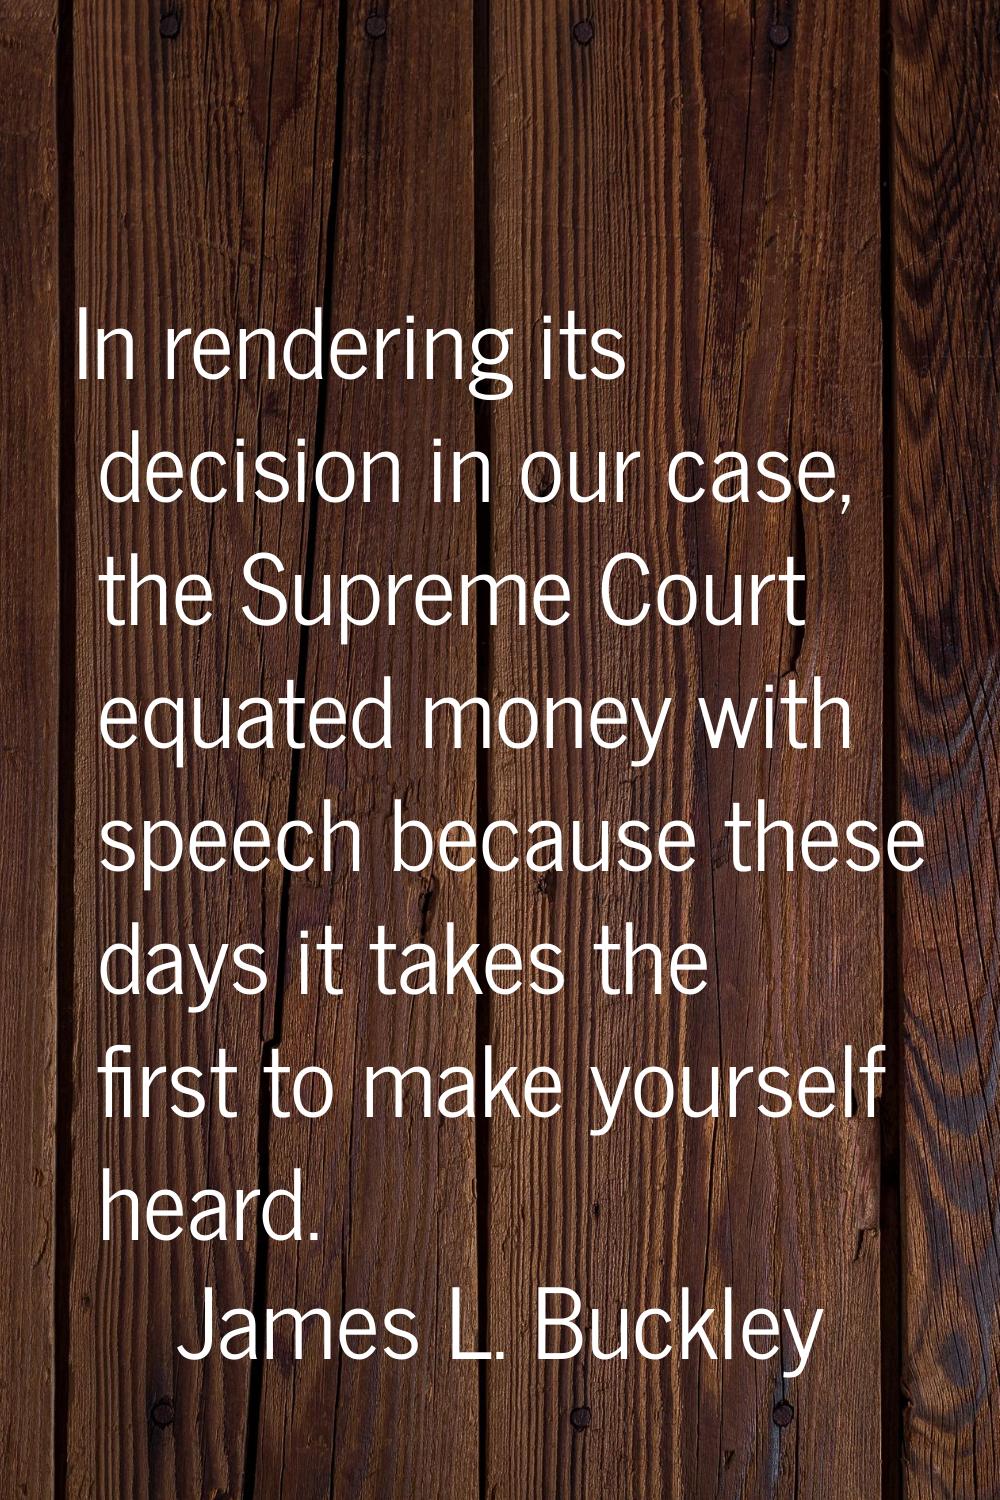 In rendering its decision in our case, the Supreme Court equated money with speech because these da